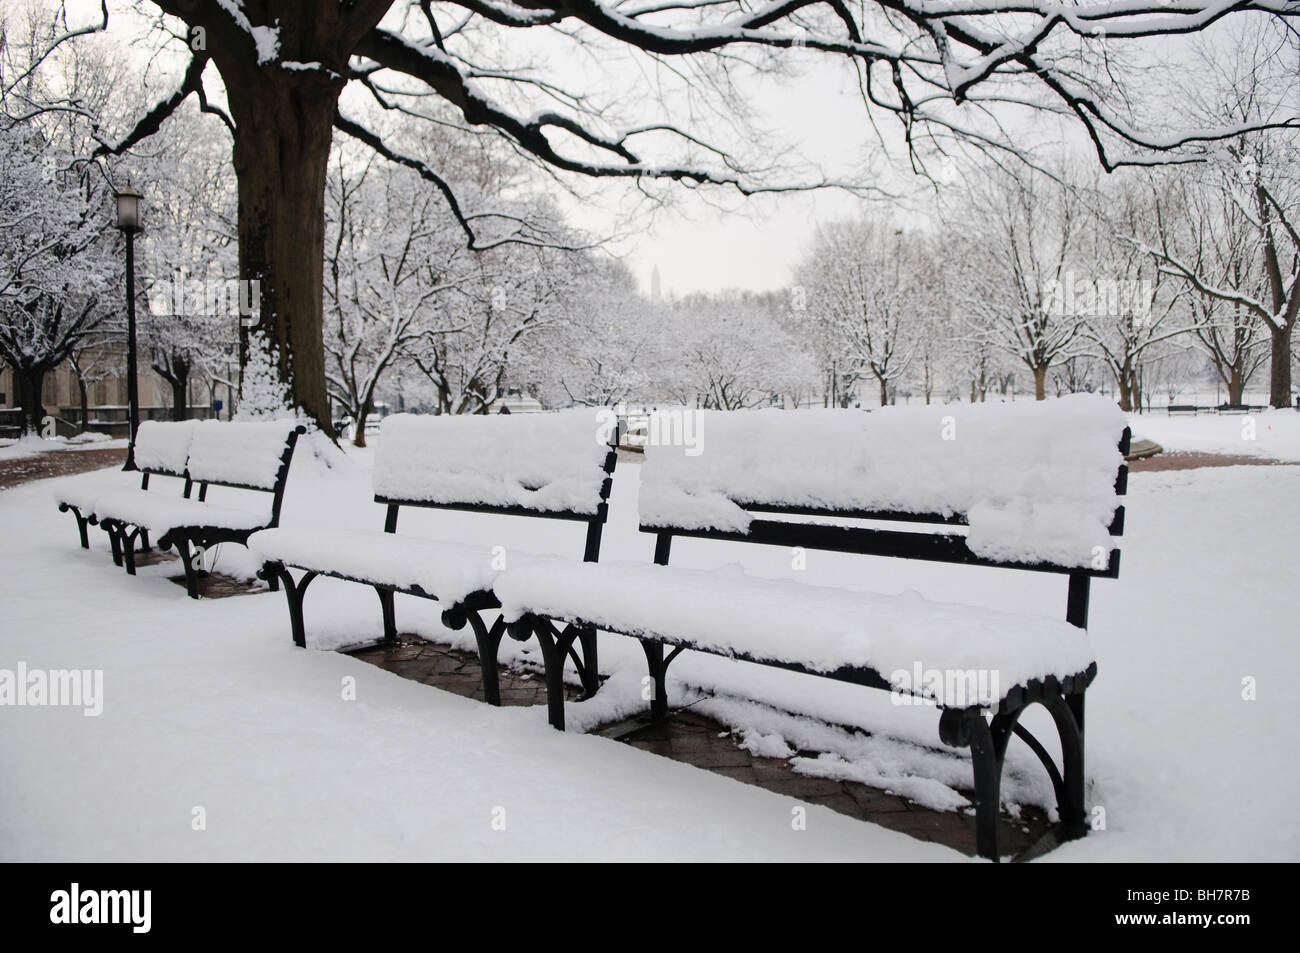 WASHINGTON DC, USA - Park benches in Lafayette Park opposite the White House in Washington DC covered in a thick layer of snow from a recent snowstorm. Stock Photo